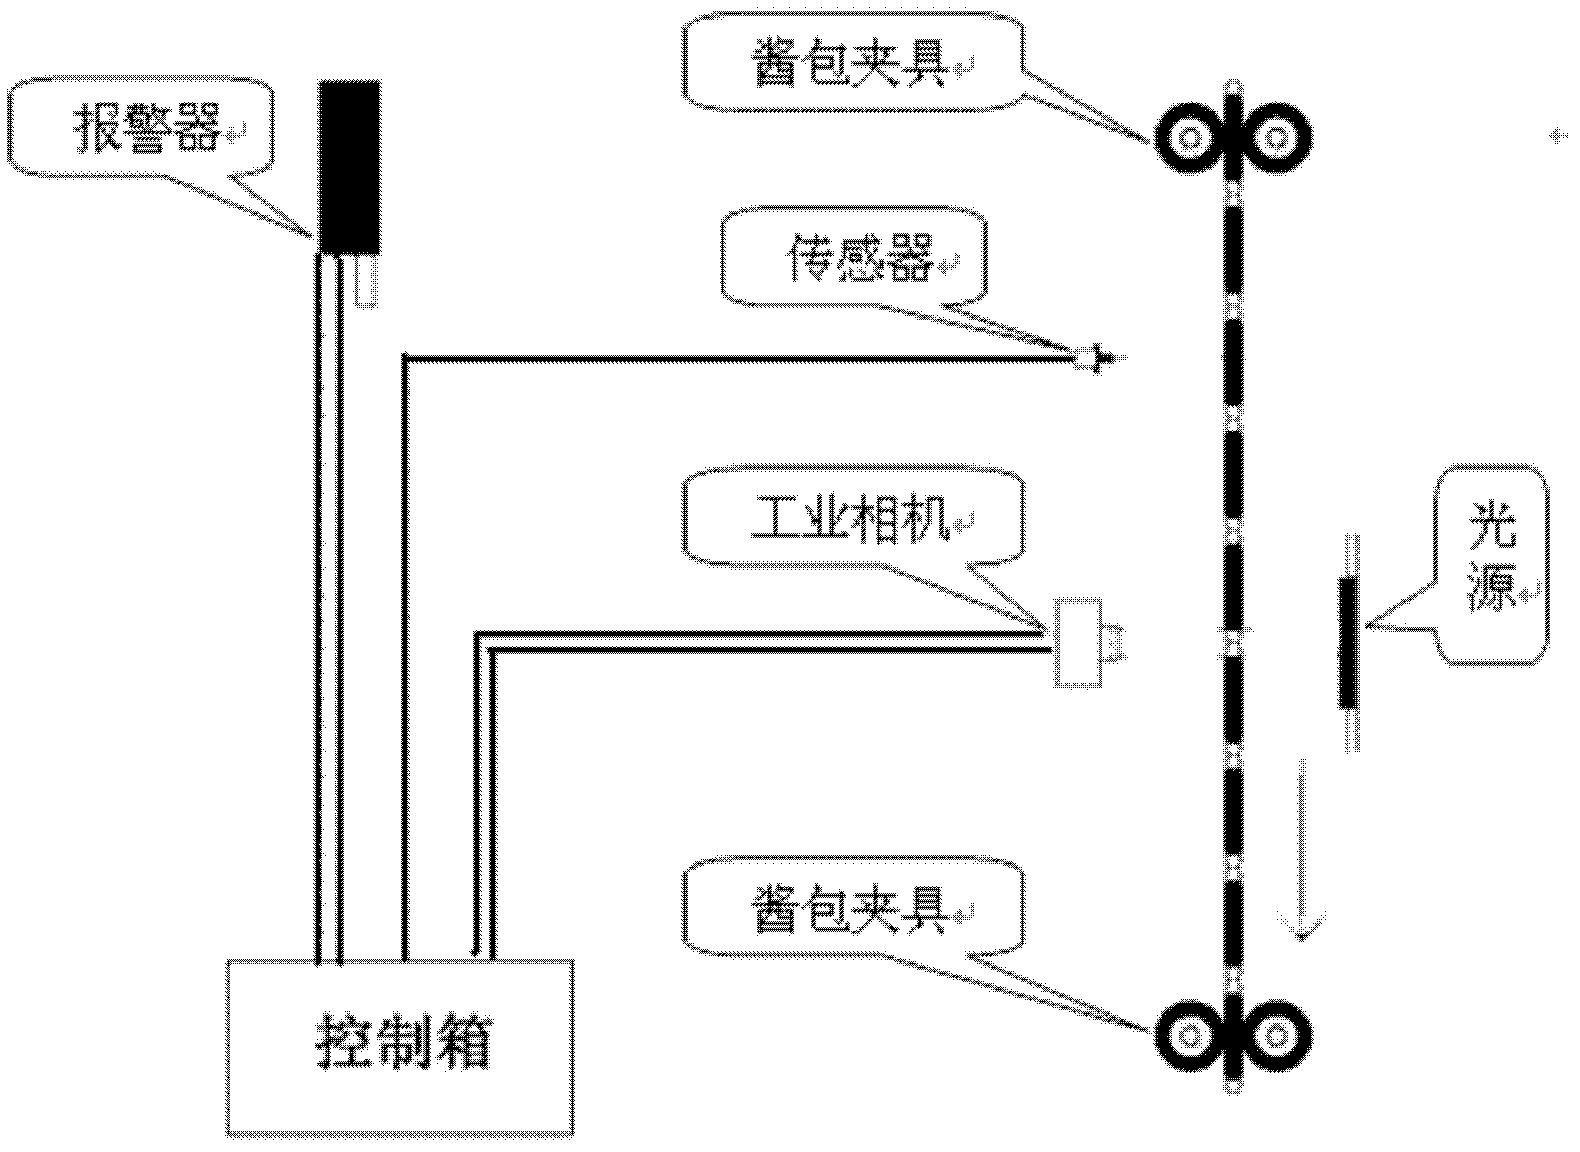 Automatic detection device based on machine vision for defects of instant noodle sauce packets and method